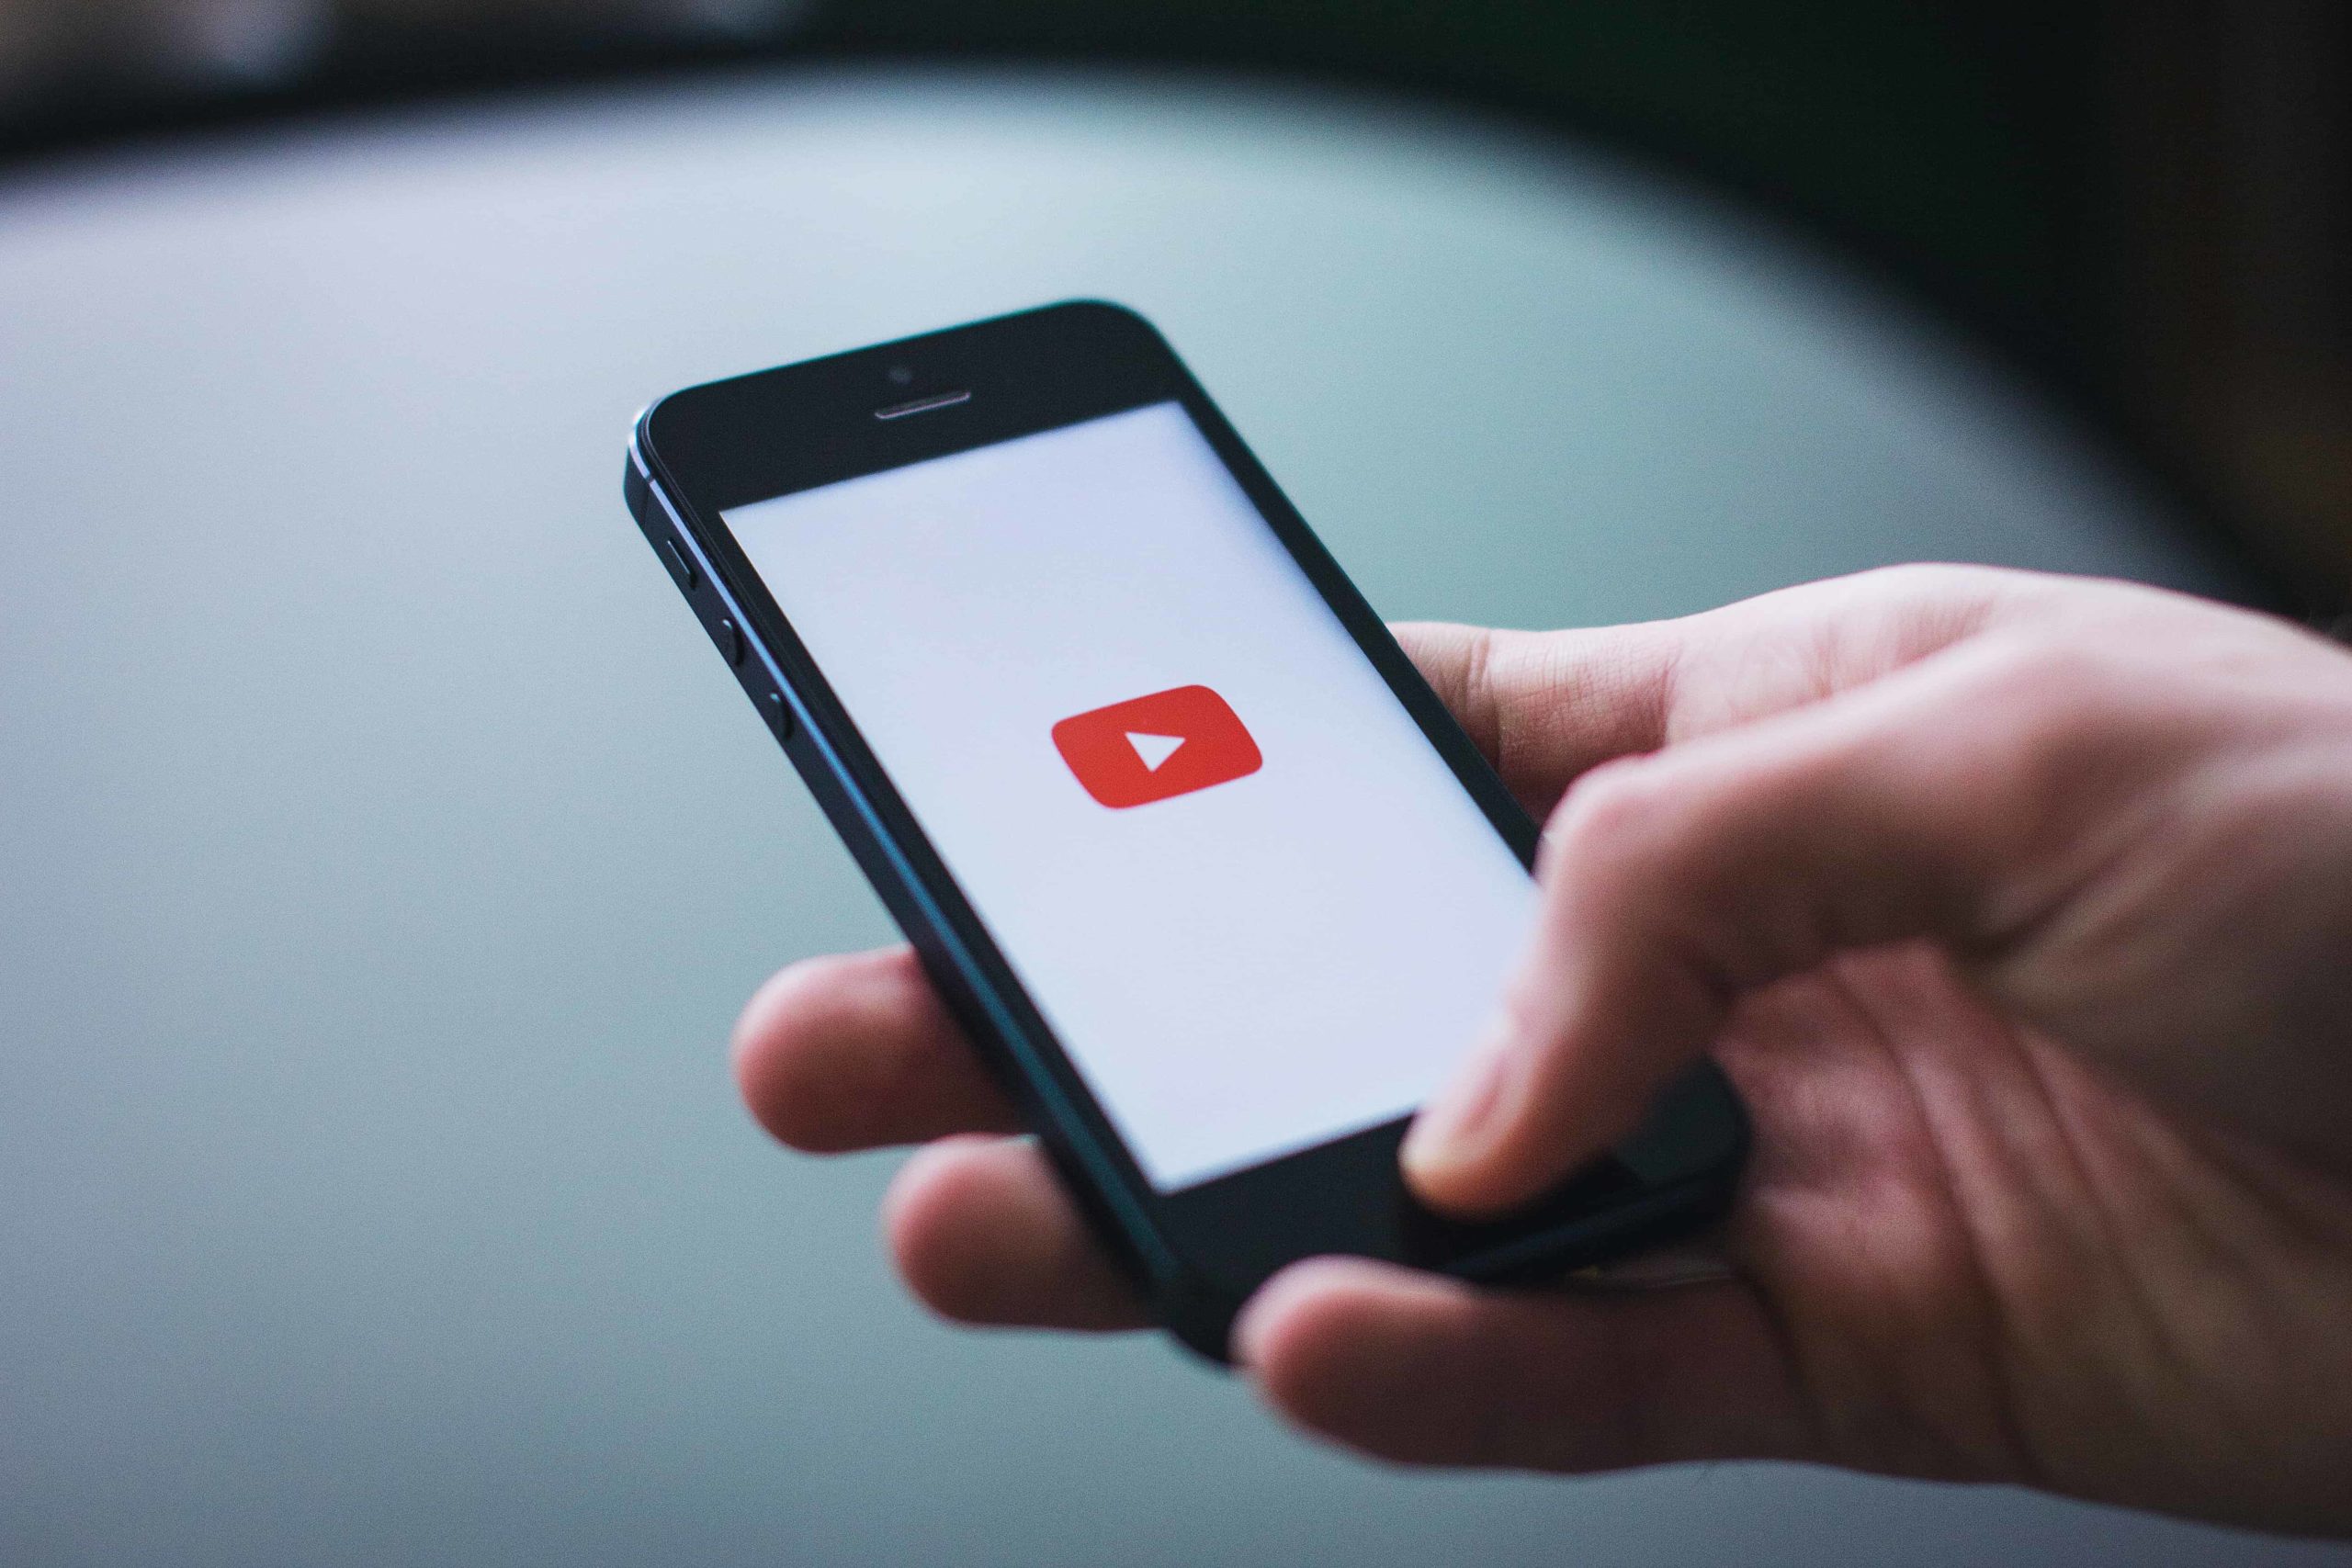 3 Reasons to Use High-Quality Video in Your Digital Marketing